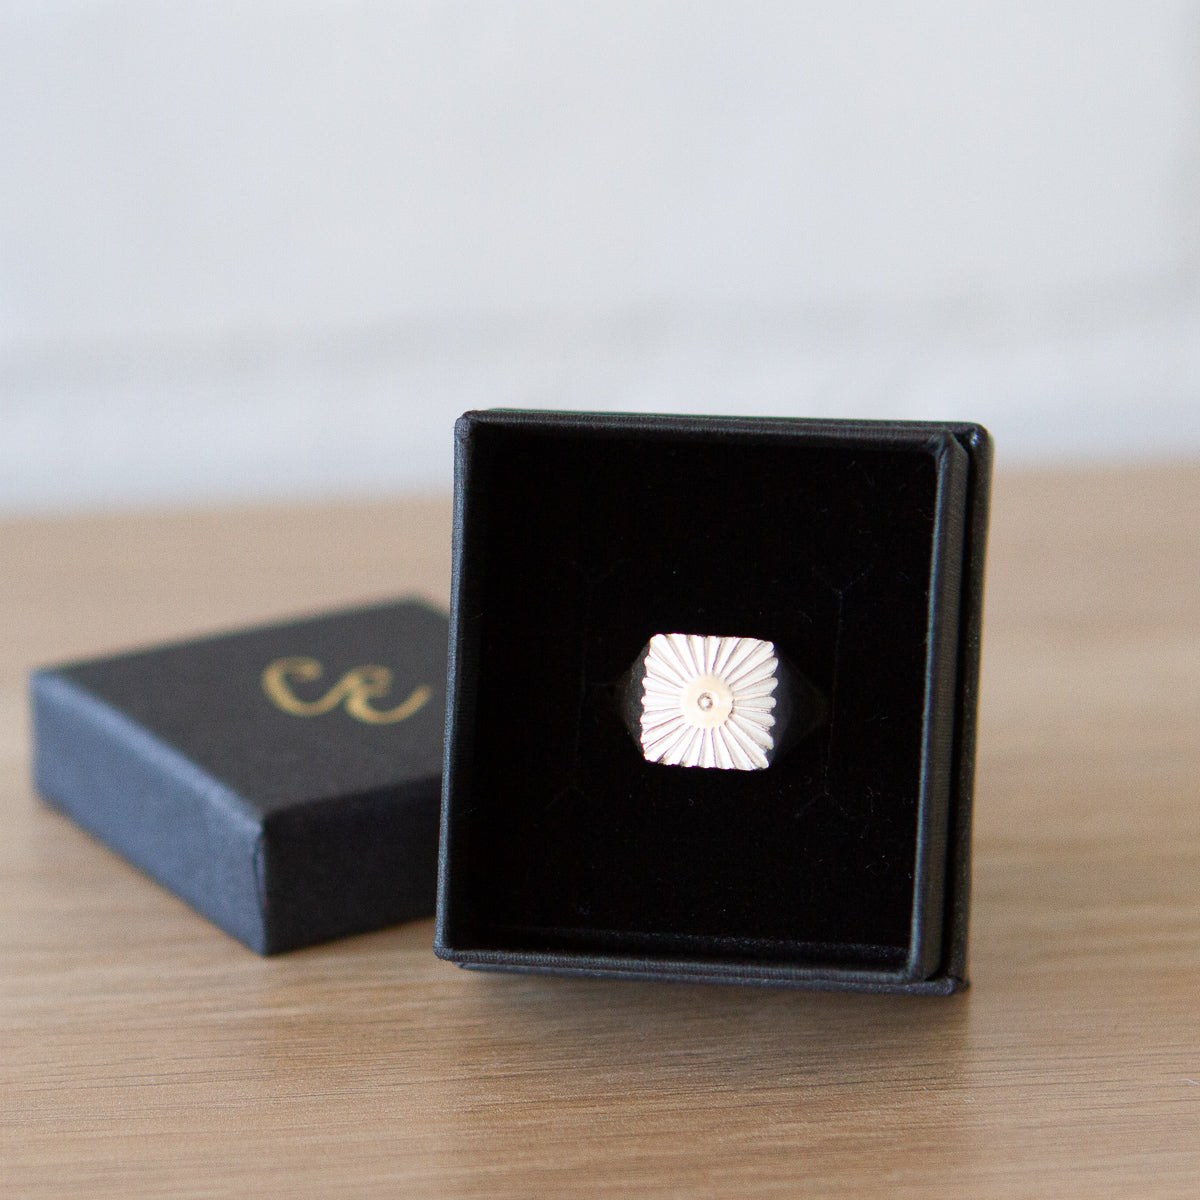 Large silver square signet ring with a carved sunburst pattern and single silver bead in the center in a gift box